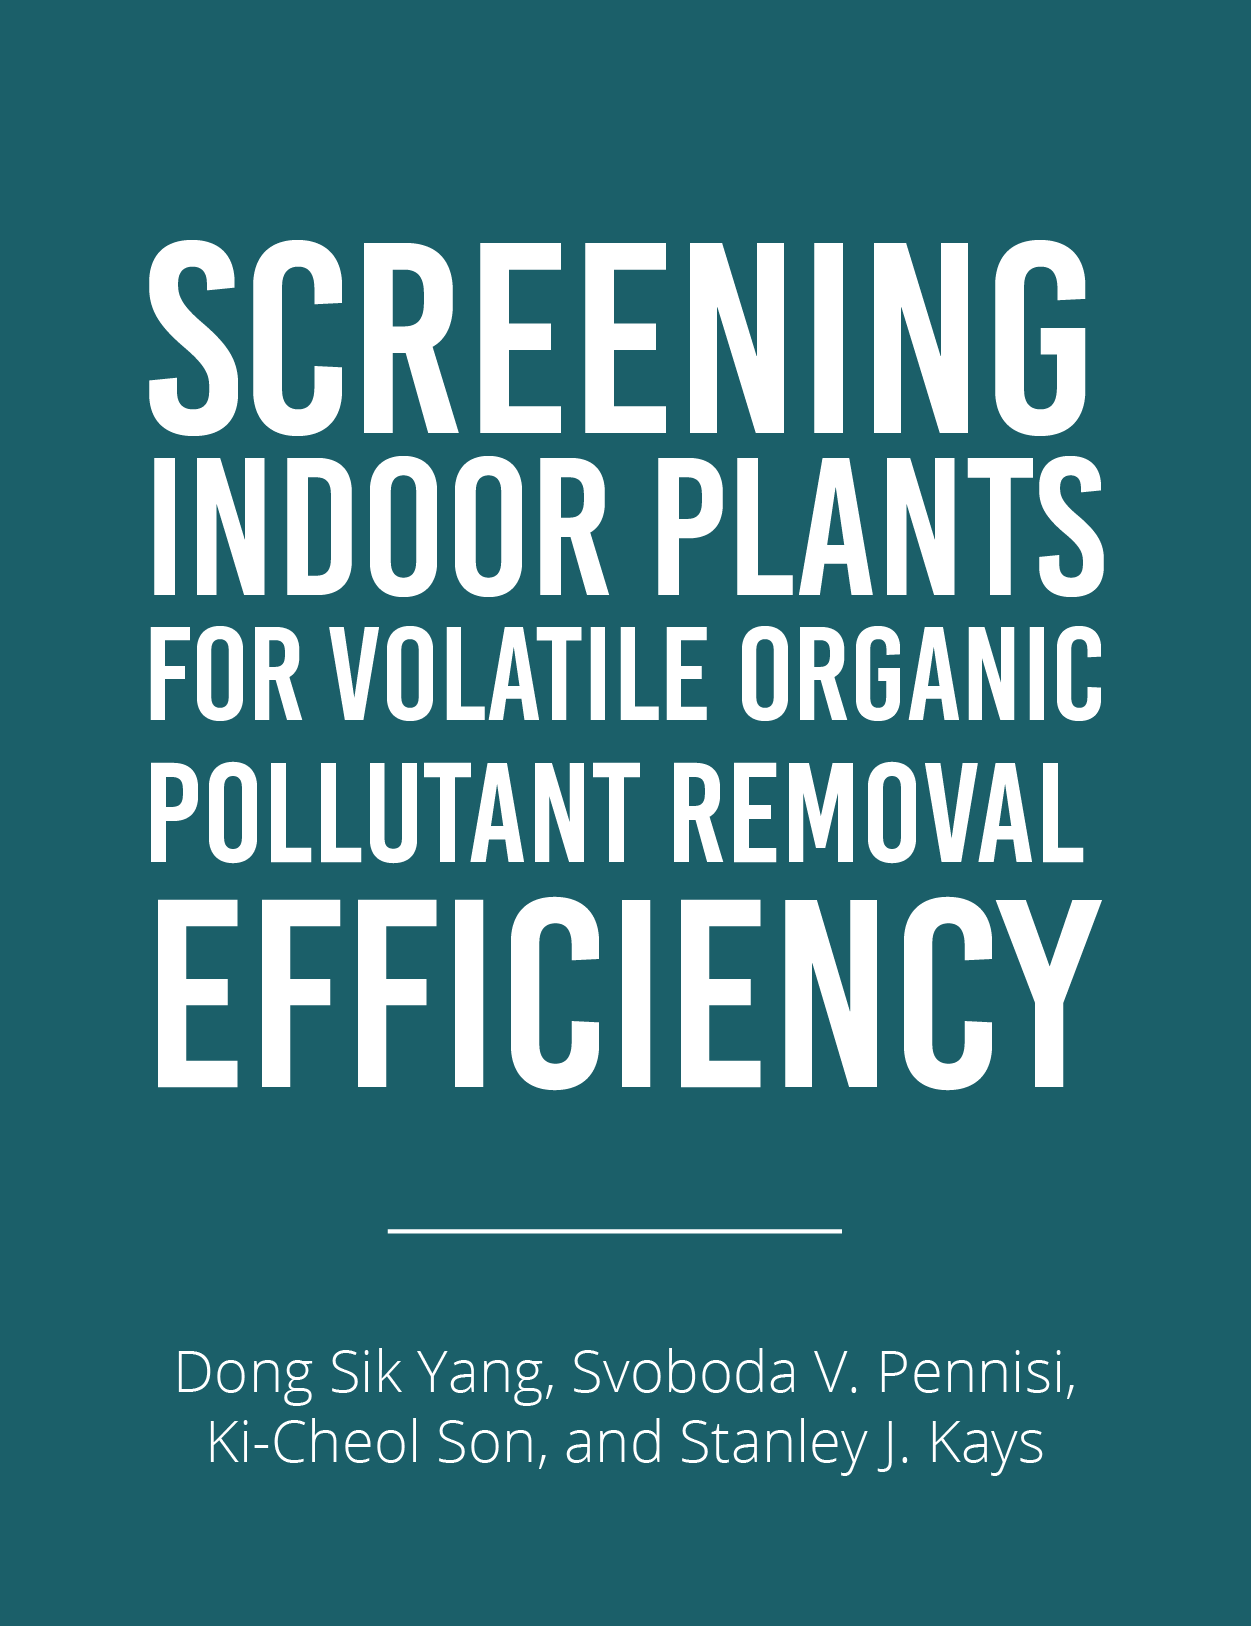 Screening Indoor Plants for VOC Removal EfficiencyFeatured Image